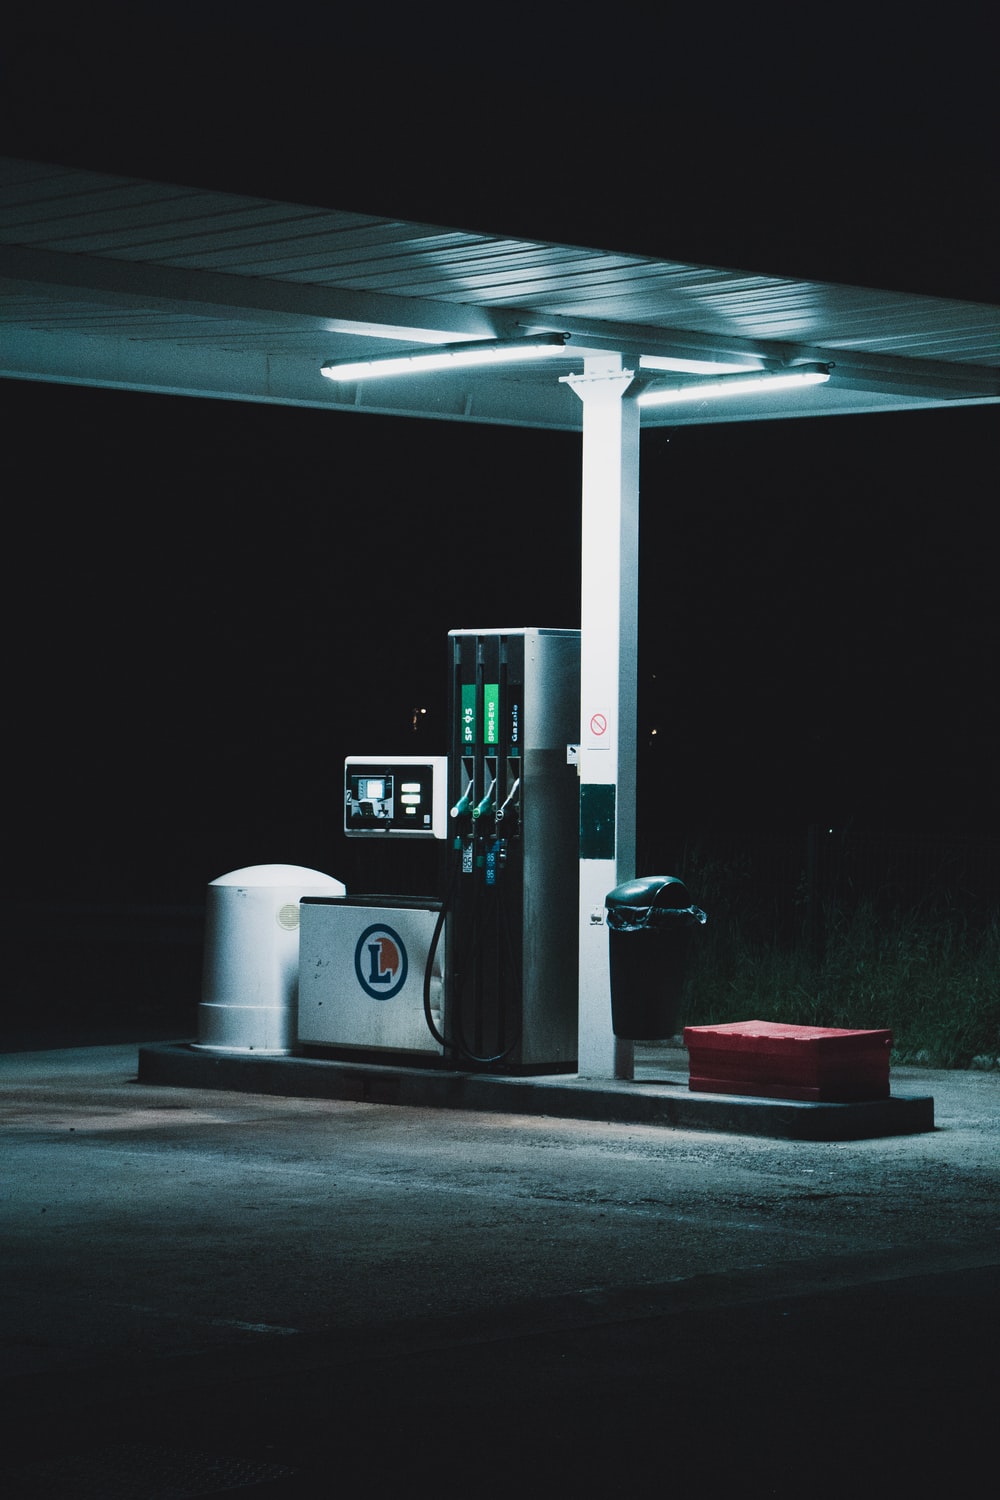 Gas Pump Picture. Download Free Image